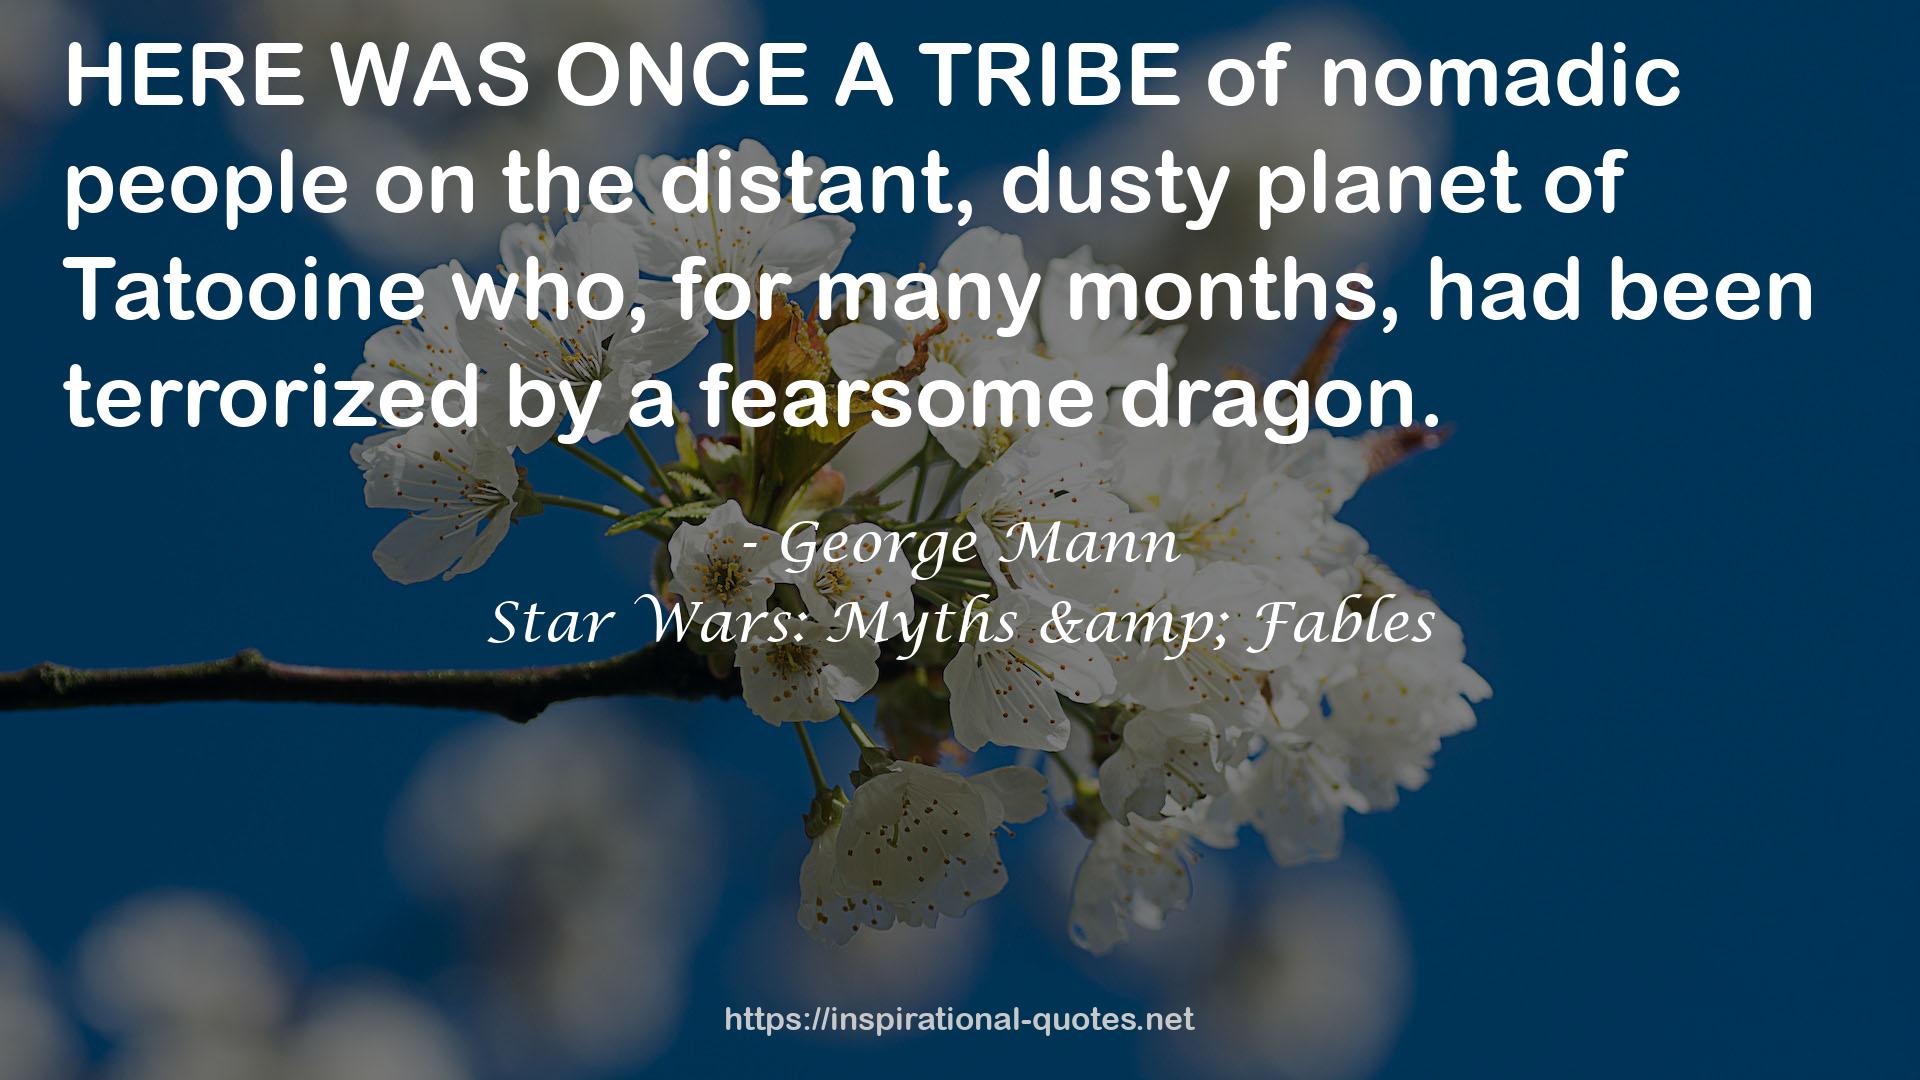 Star Wars: Myths & Fables QUOTES